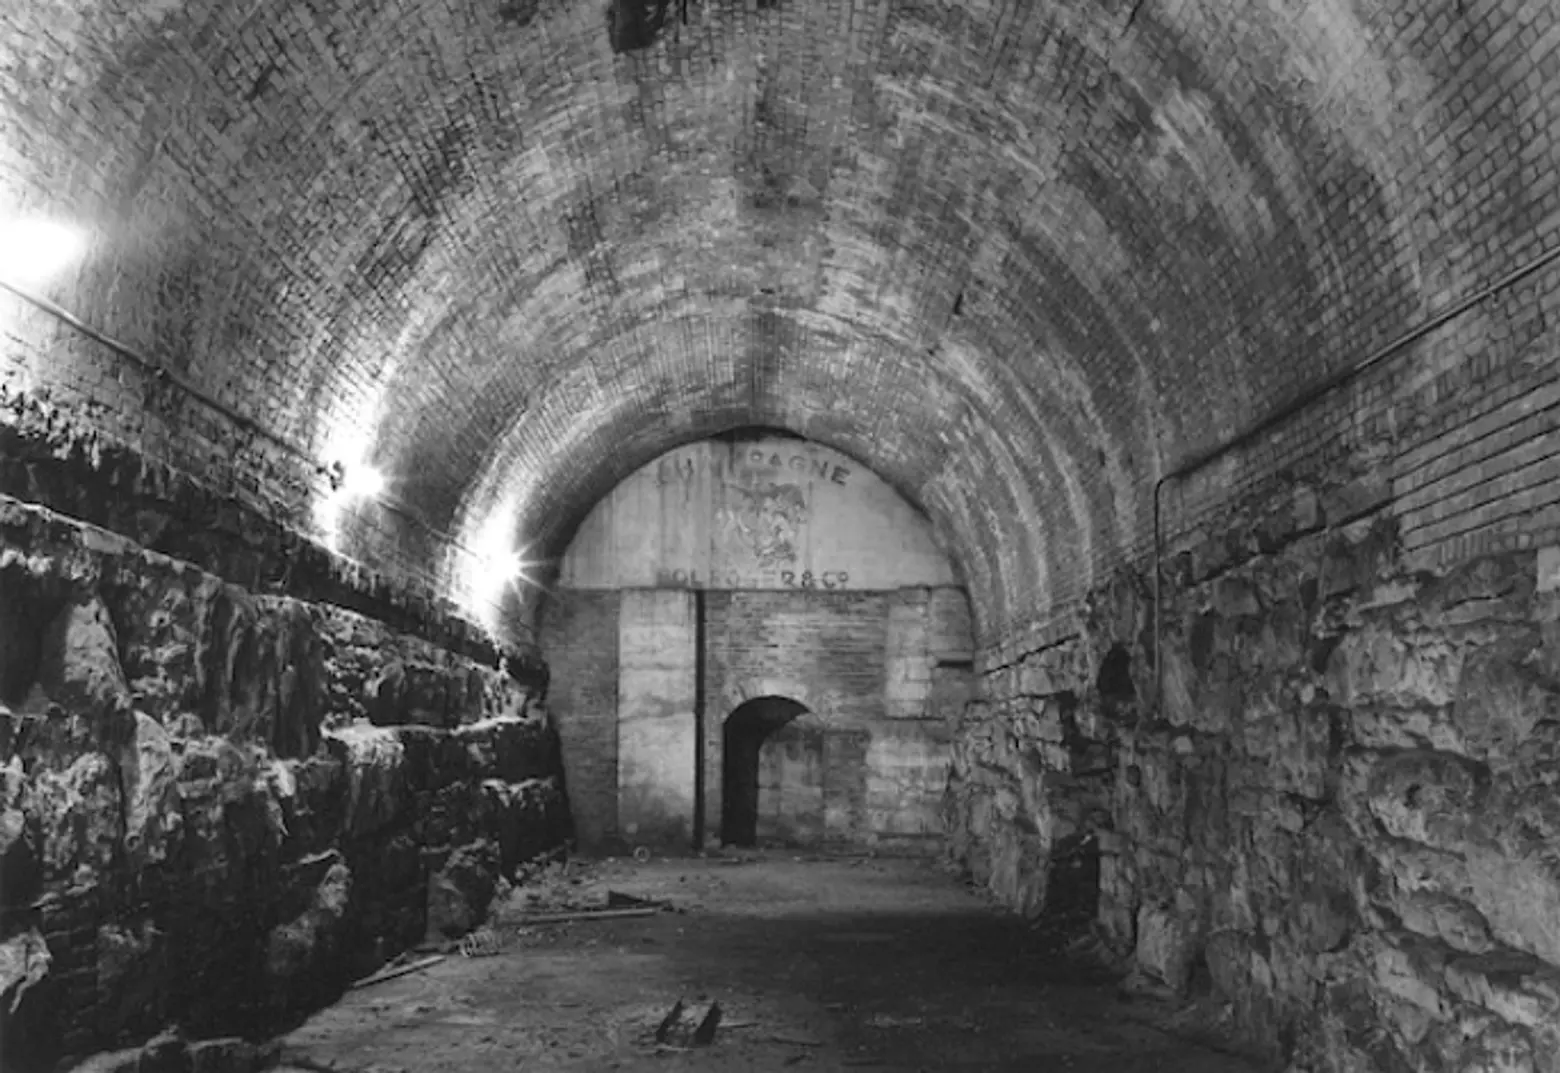 There’s a Cold War Bomb Shelter Hidden Under the Brooklyn Bridge